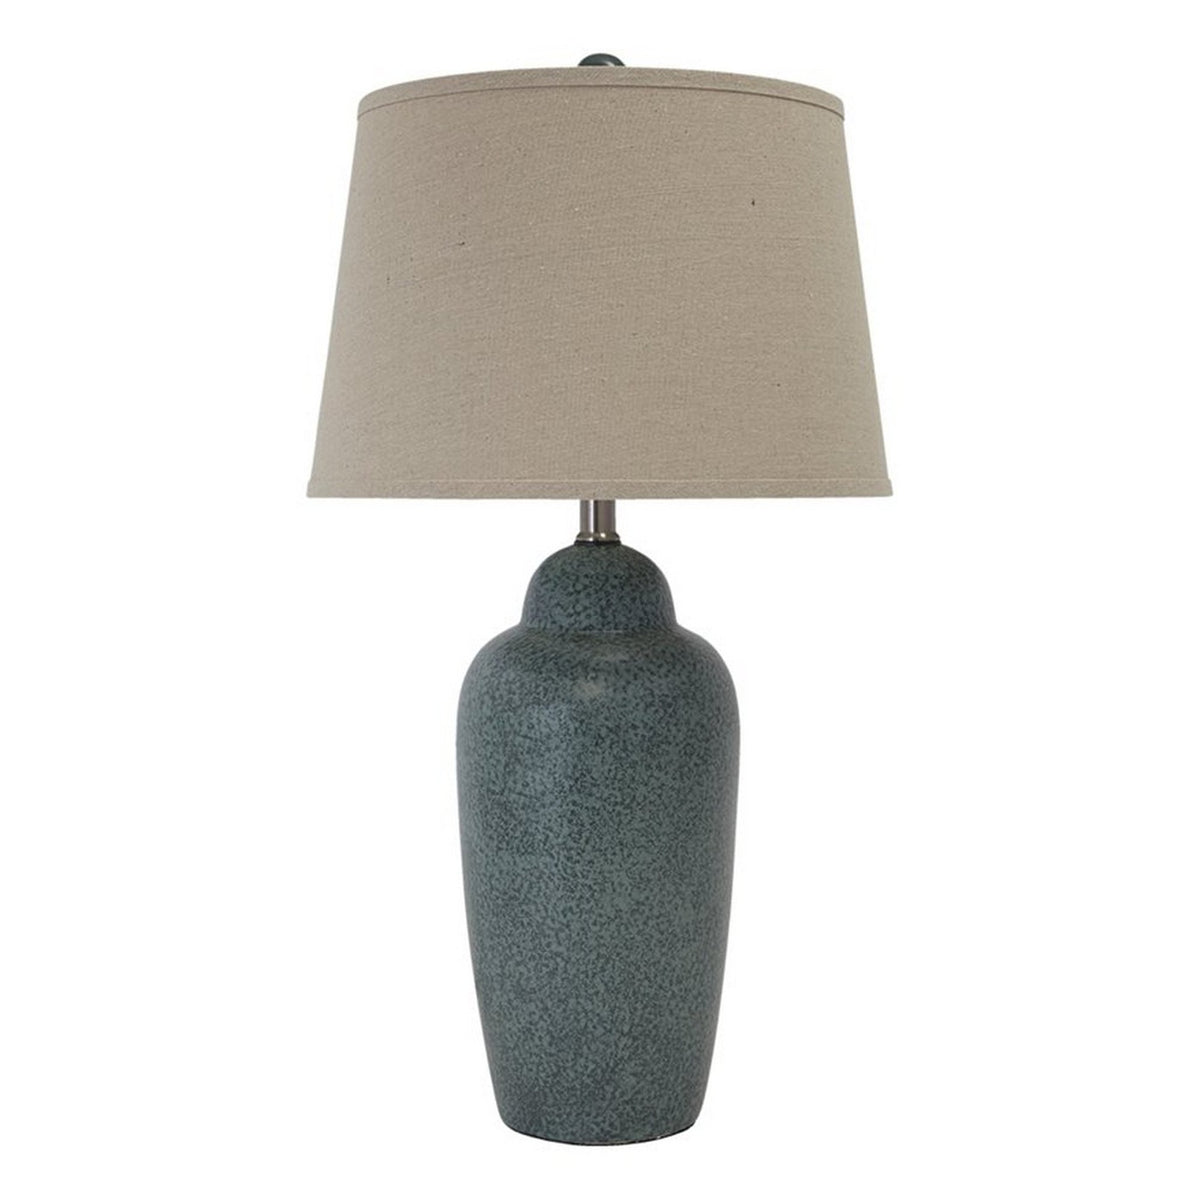 150 Watt Ceramic Body Table Lamp with Tapered Fabric Shade, Green and Beige - BM227185